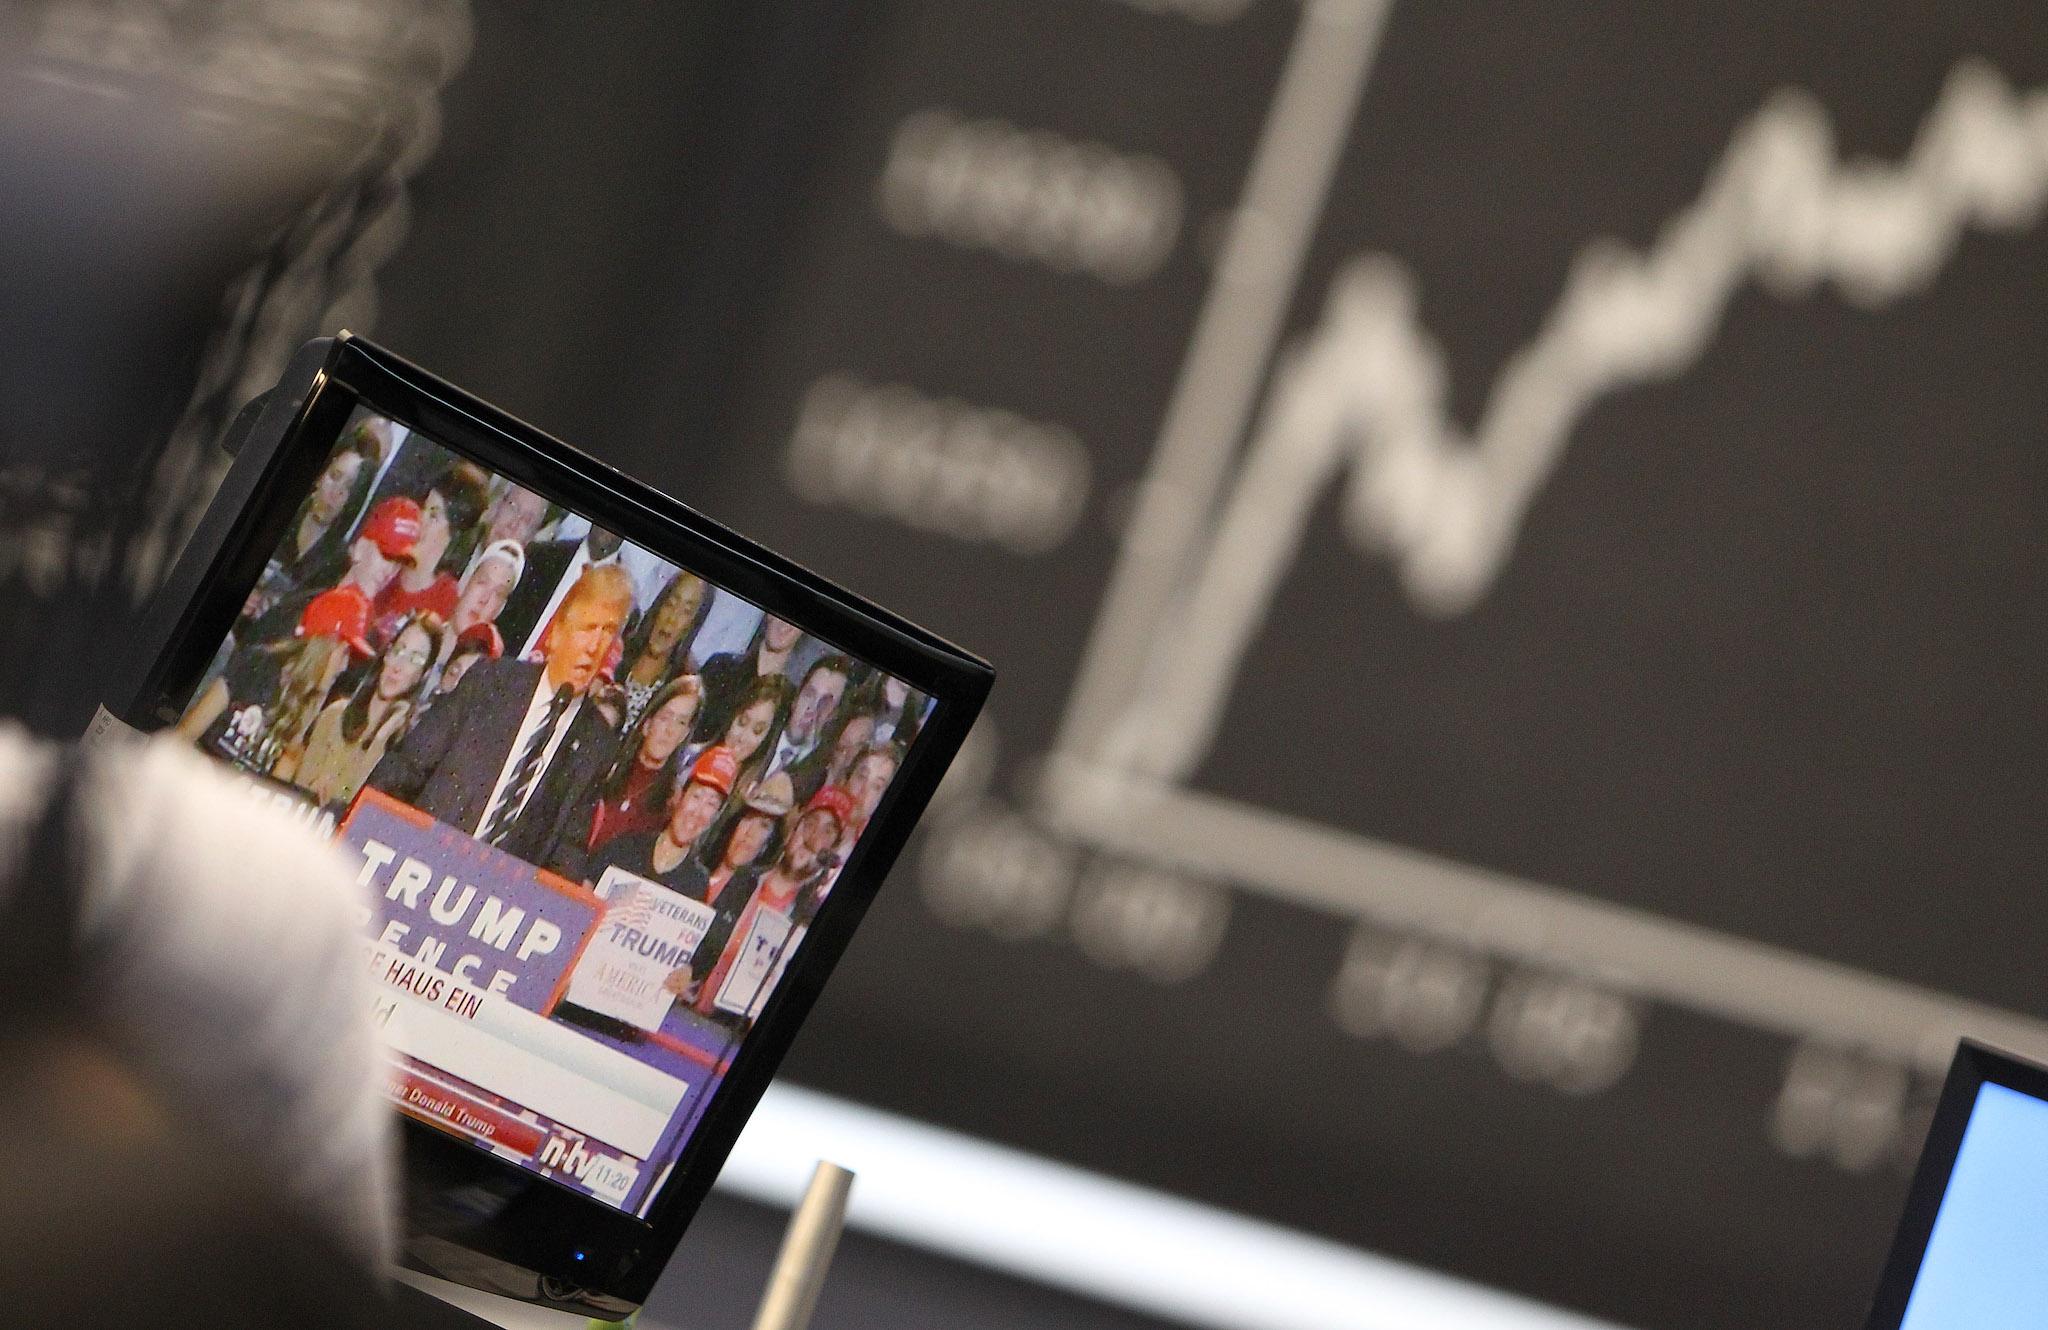 A display showing the German Stock Market Index DAX is pictured at the stock exchange in Frankfurt, Germany, on November 9, 2016 as the Tv screens shows the results of presidential elections in US